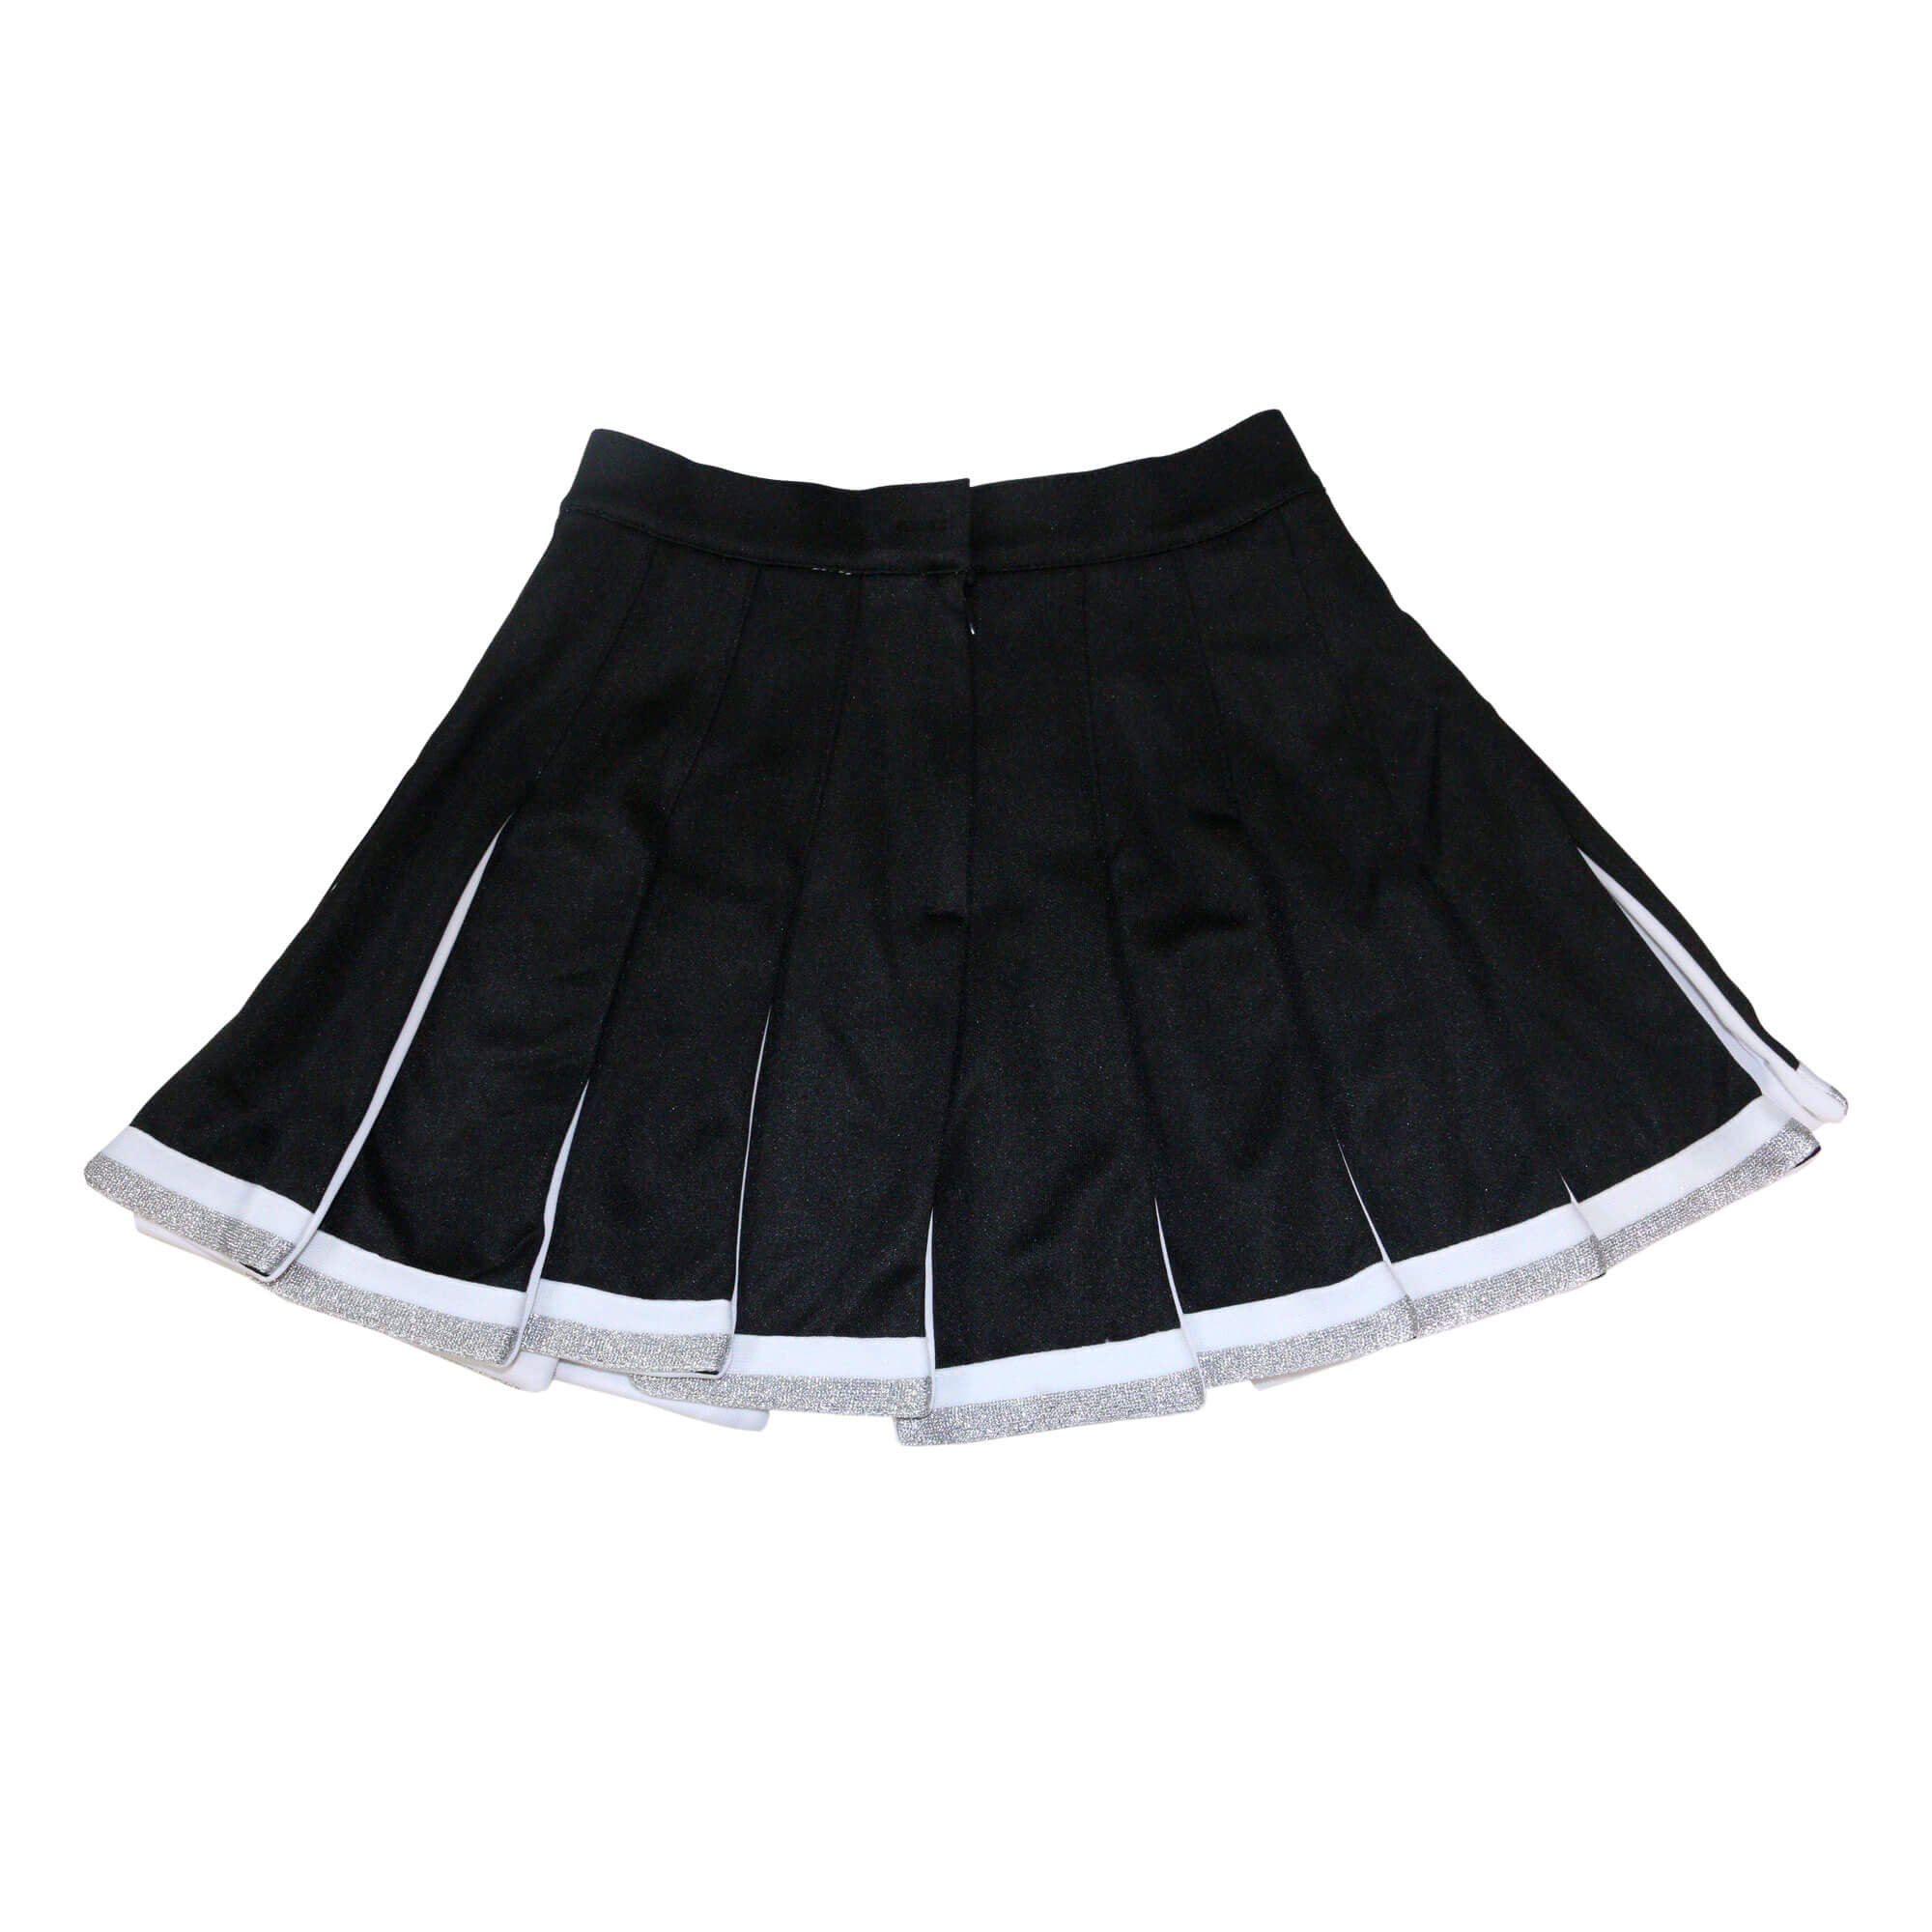 Danzcue Adult Cheerleading Pleated Skirt - Click Image to Close